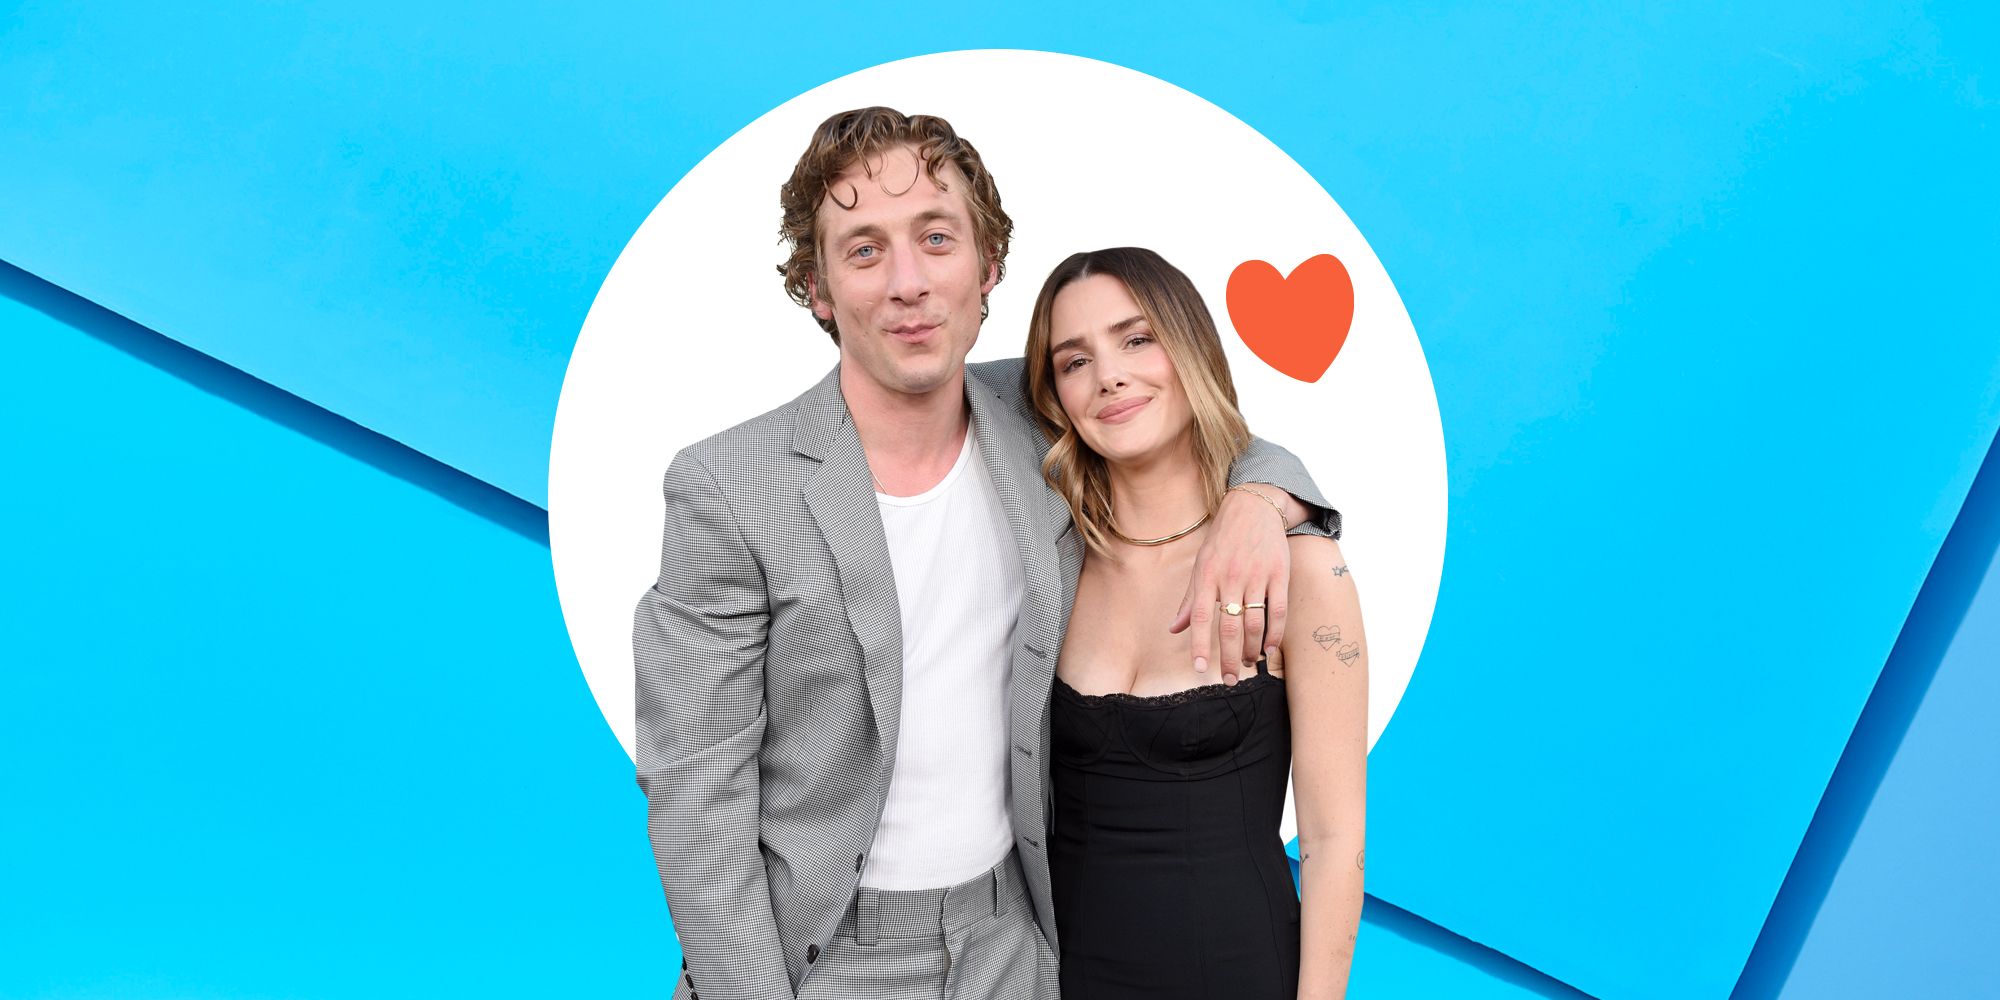 Jeremy Allen White And Wife Addison Timlins Body Language, Explained photo